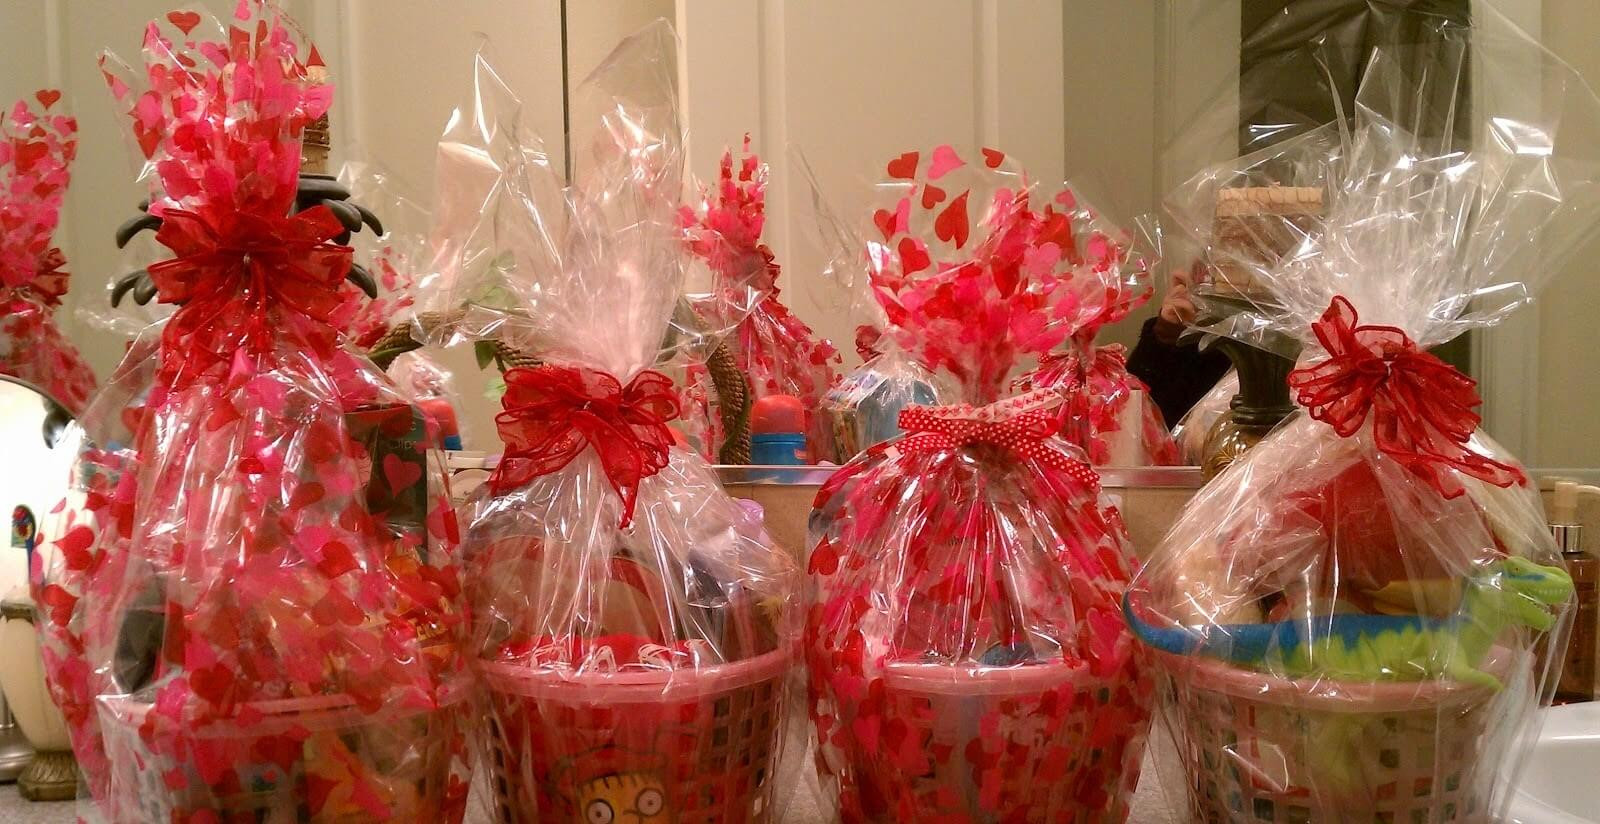 Valentines Day Photo Gift Ideas
 Best Valentine s Day Gift Baskets Boxes & Gift Sets Ideas